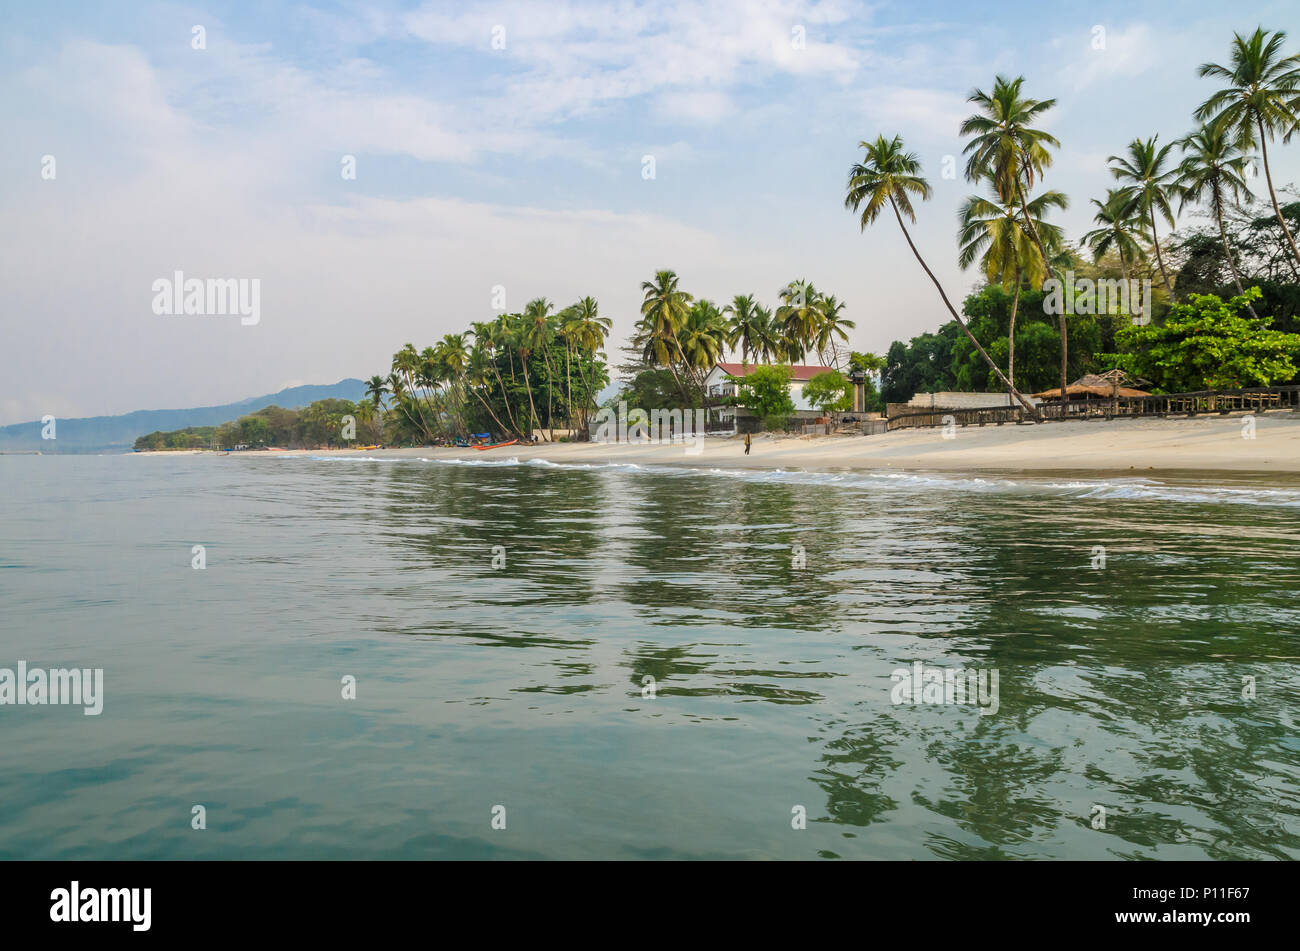 Calm water, palm trees and white sand beach at Tokeh Beach, south of Freetown, Sierra Leone, Africa Stock Photo